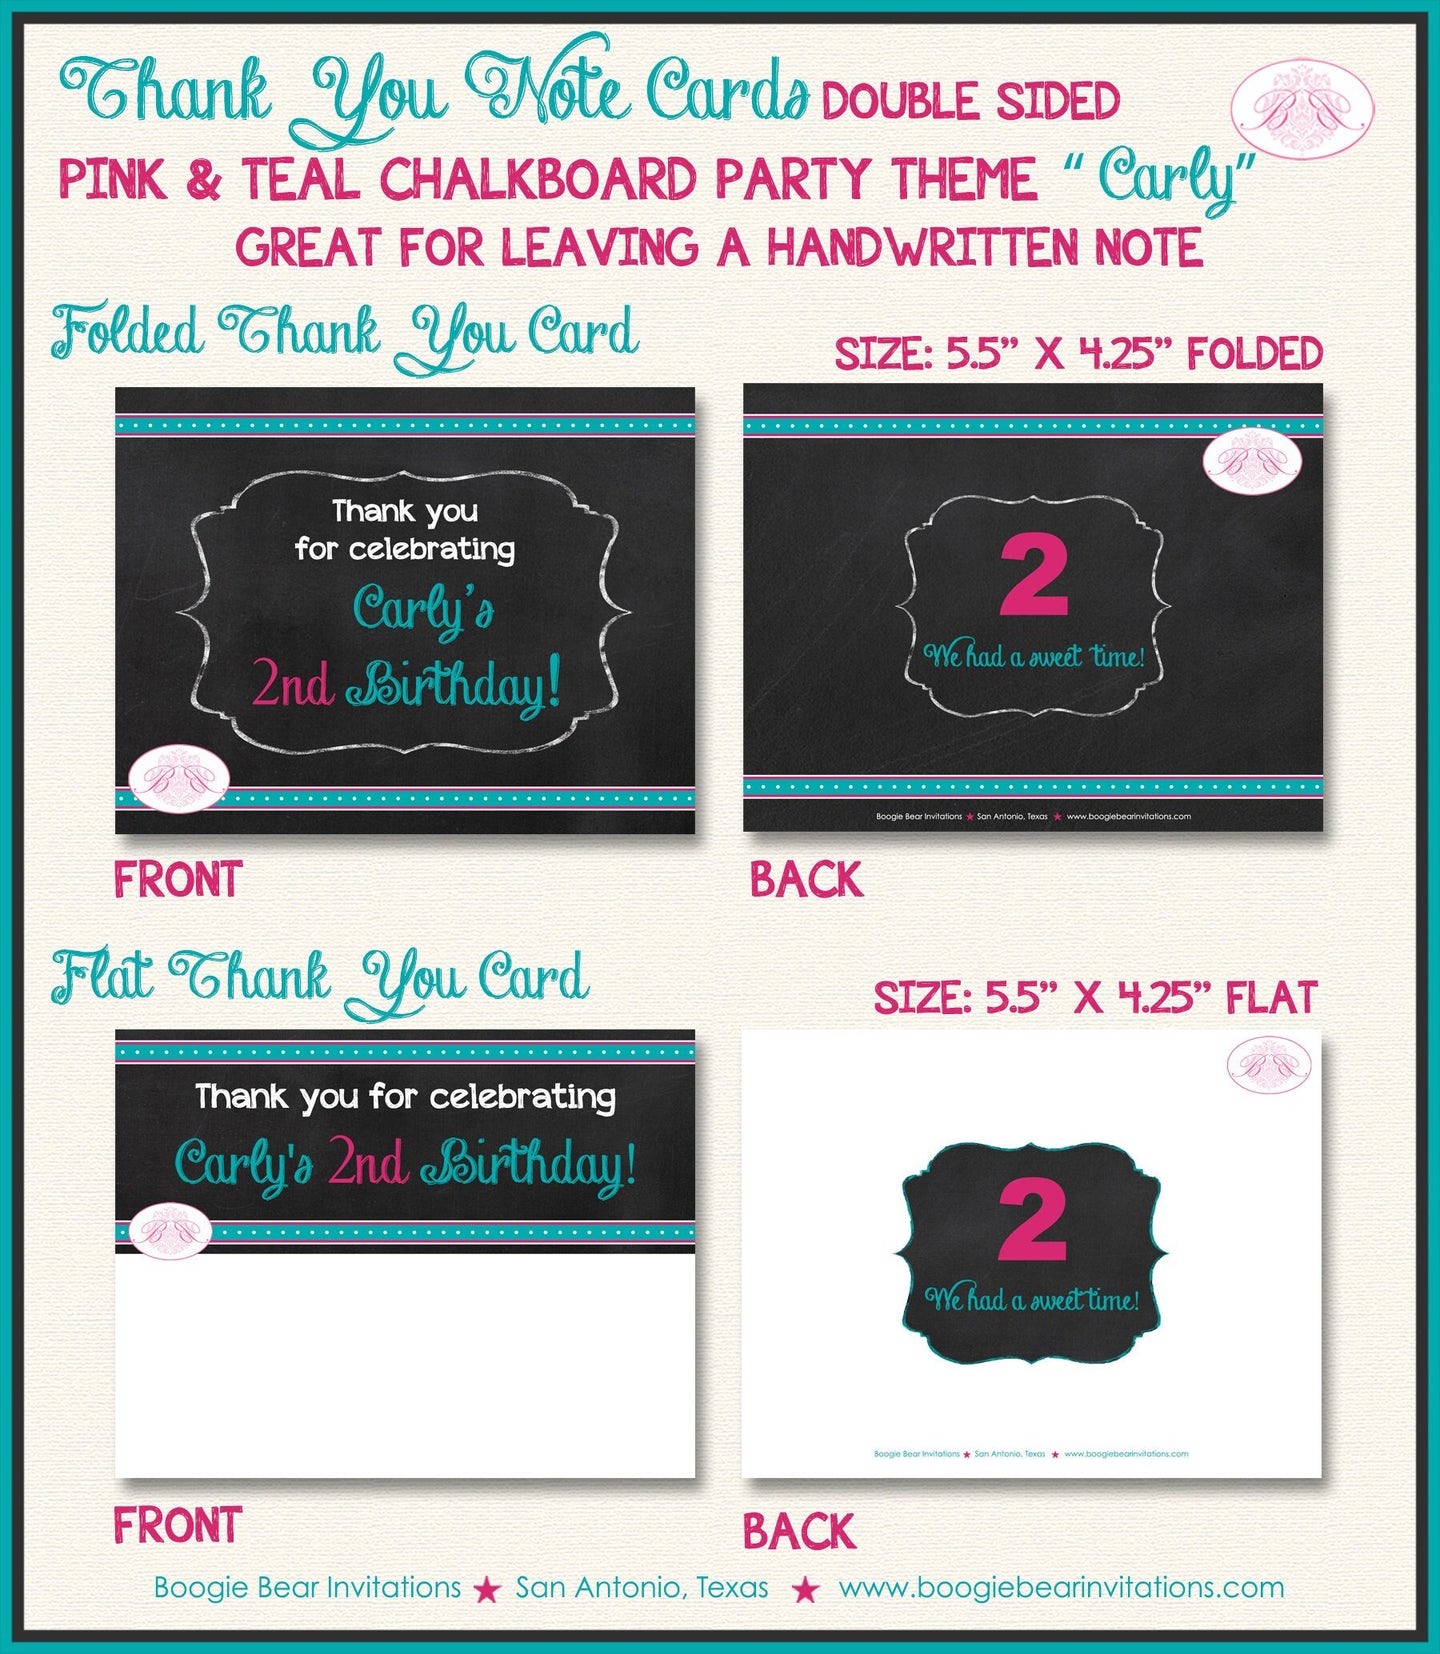 Chalkboard Pink Teal Birthday Party Thank You Card Graphic Scallop Number Script Text Font Blue Boogie Bear Invitations Carly Theme Printed